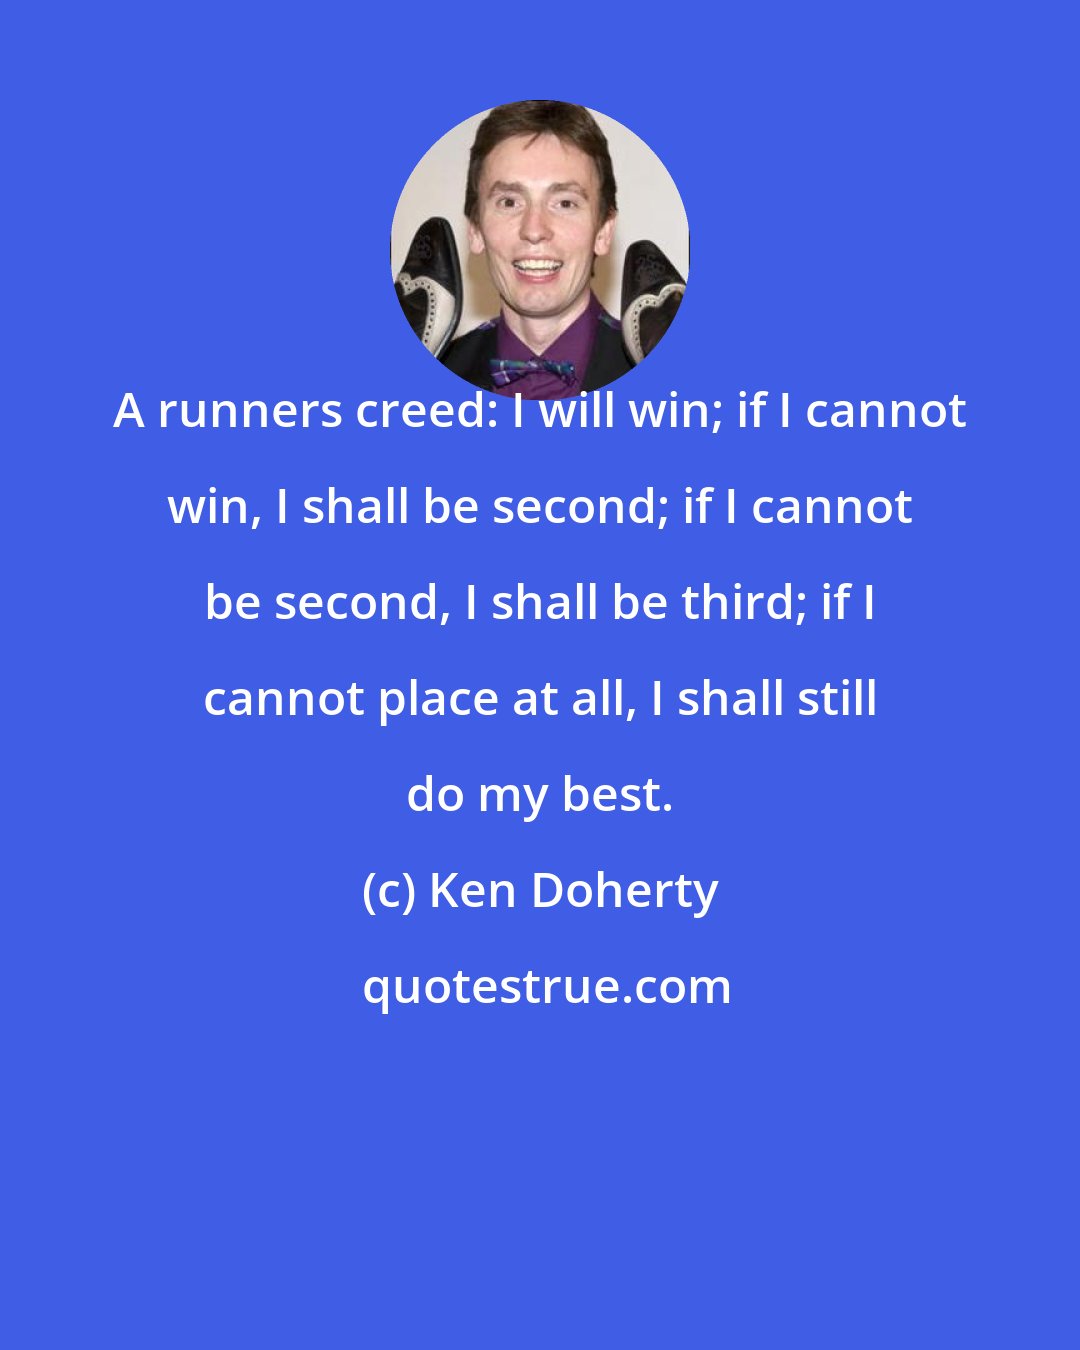 Ken Doherty: A runners creed: I will win; if I cannot win, I shall be second; if I cannot be second, I shall be third; if I cannot place at all, I shall still do my best.